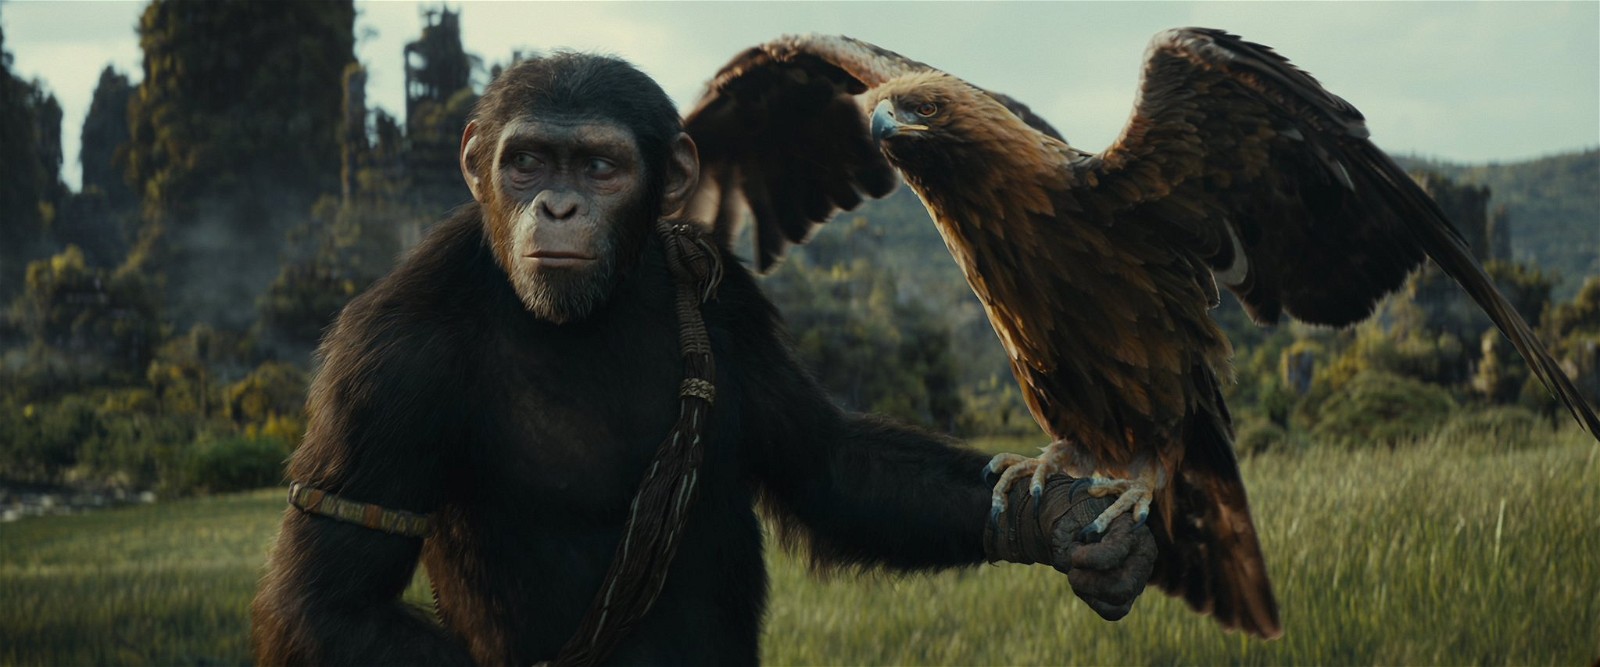 A still from Kingdom of the Planet of the Apes